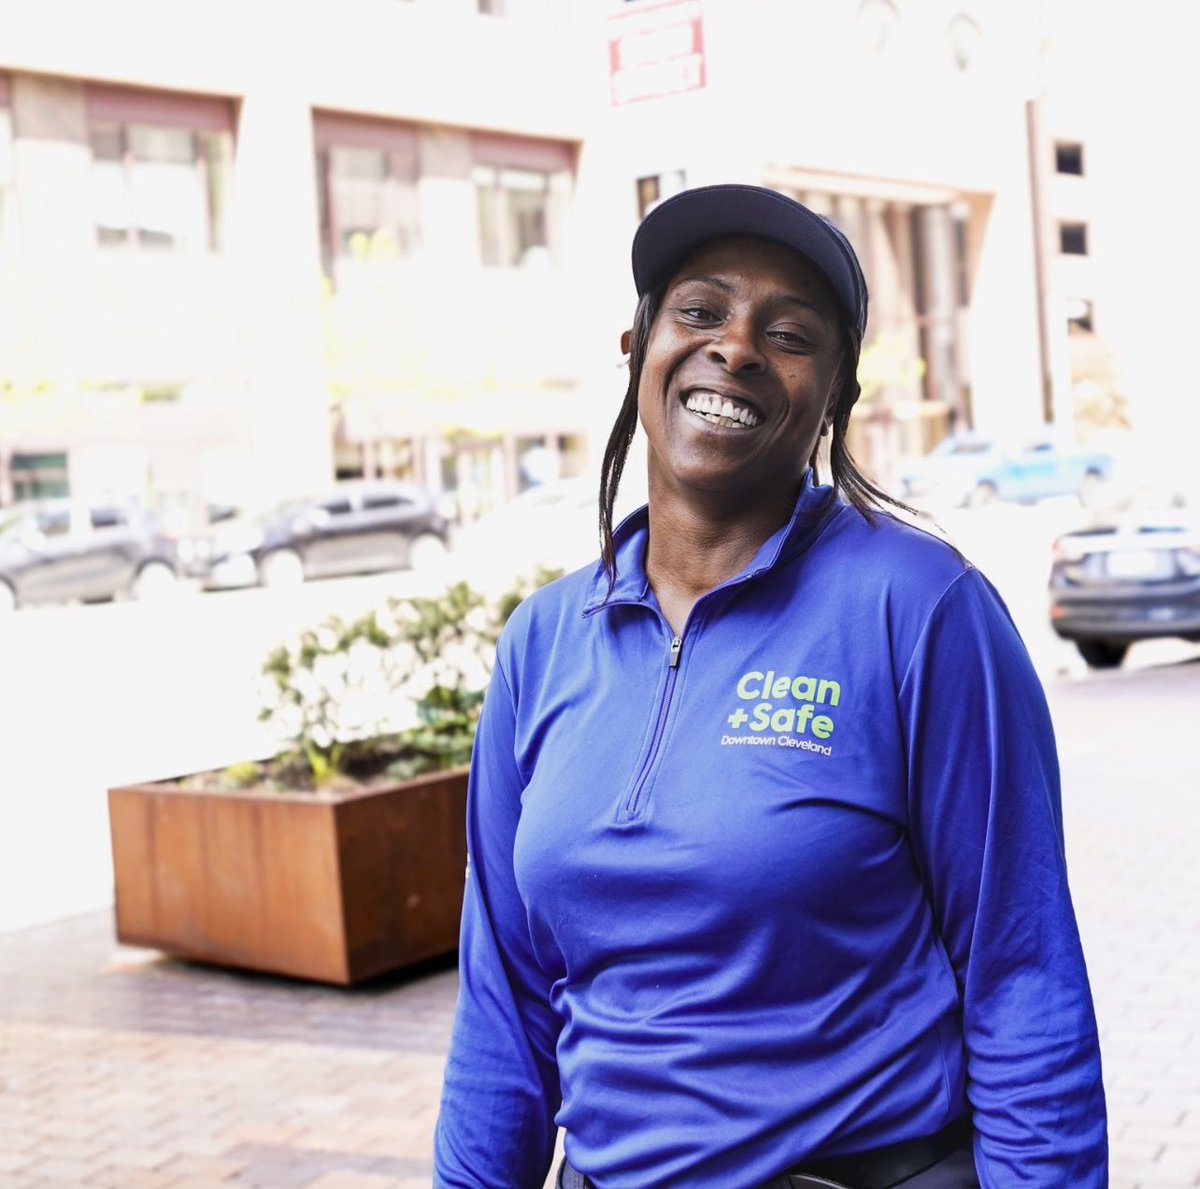 💙 Downtown Cleveland’s Clean and Safe Ambassadors have a fresh new look! 💚 Downtown residents, workers, and visitors will now see their yellow uniforms replaced with blue and green ones to freshen up their look and better tie into our branding. (1/4)